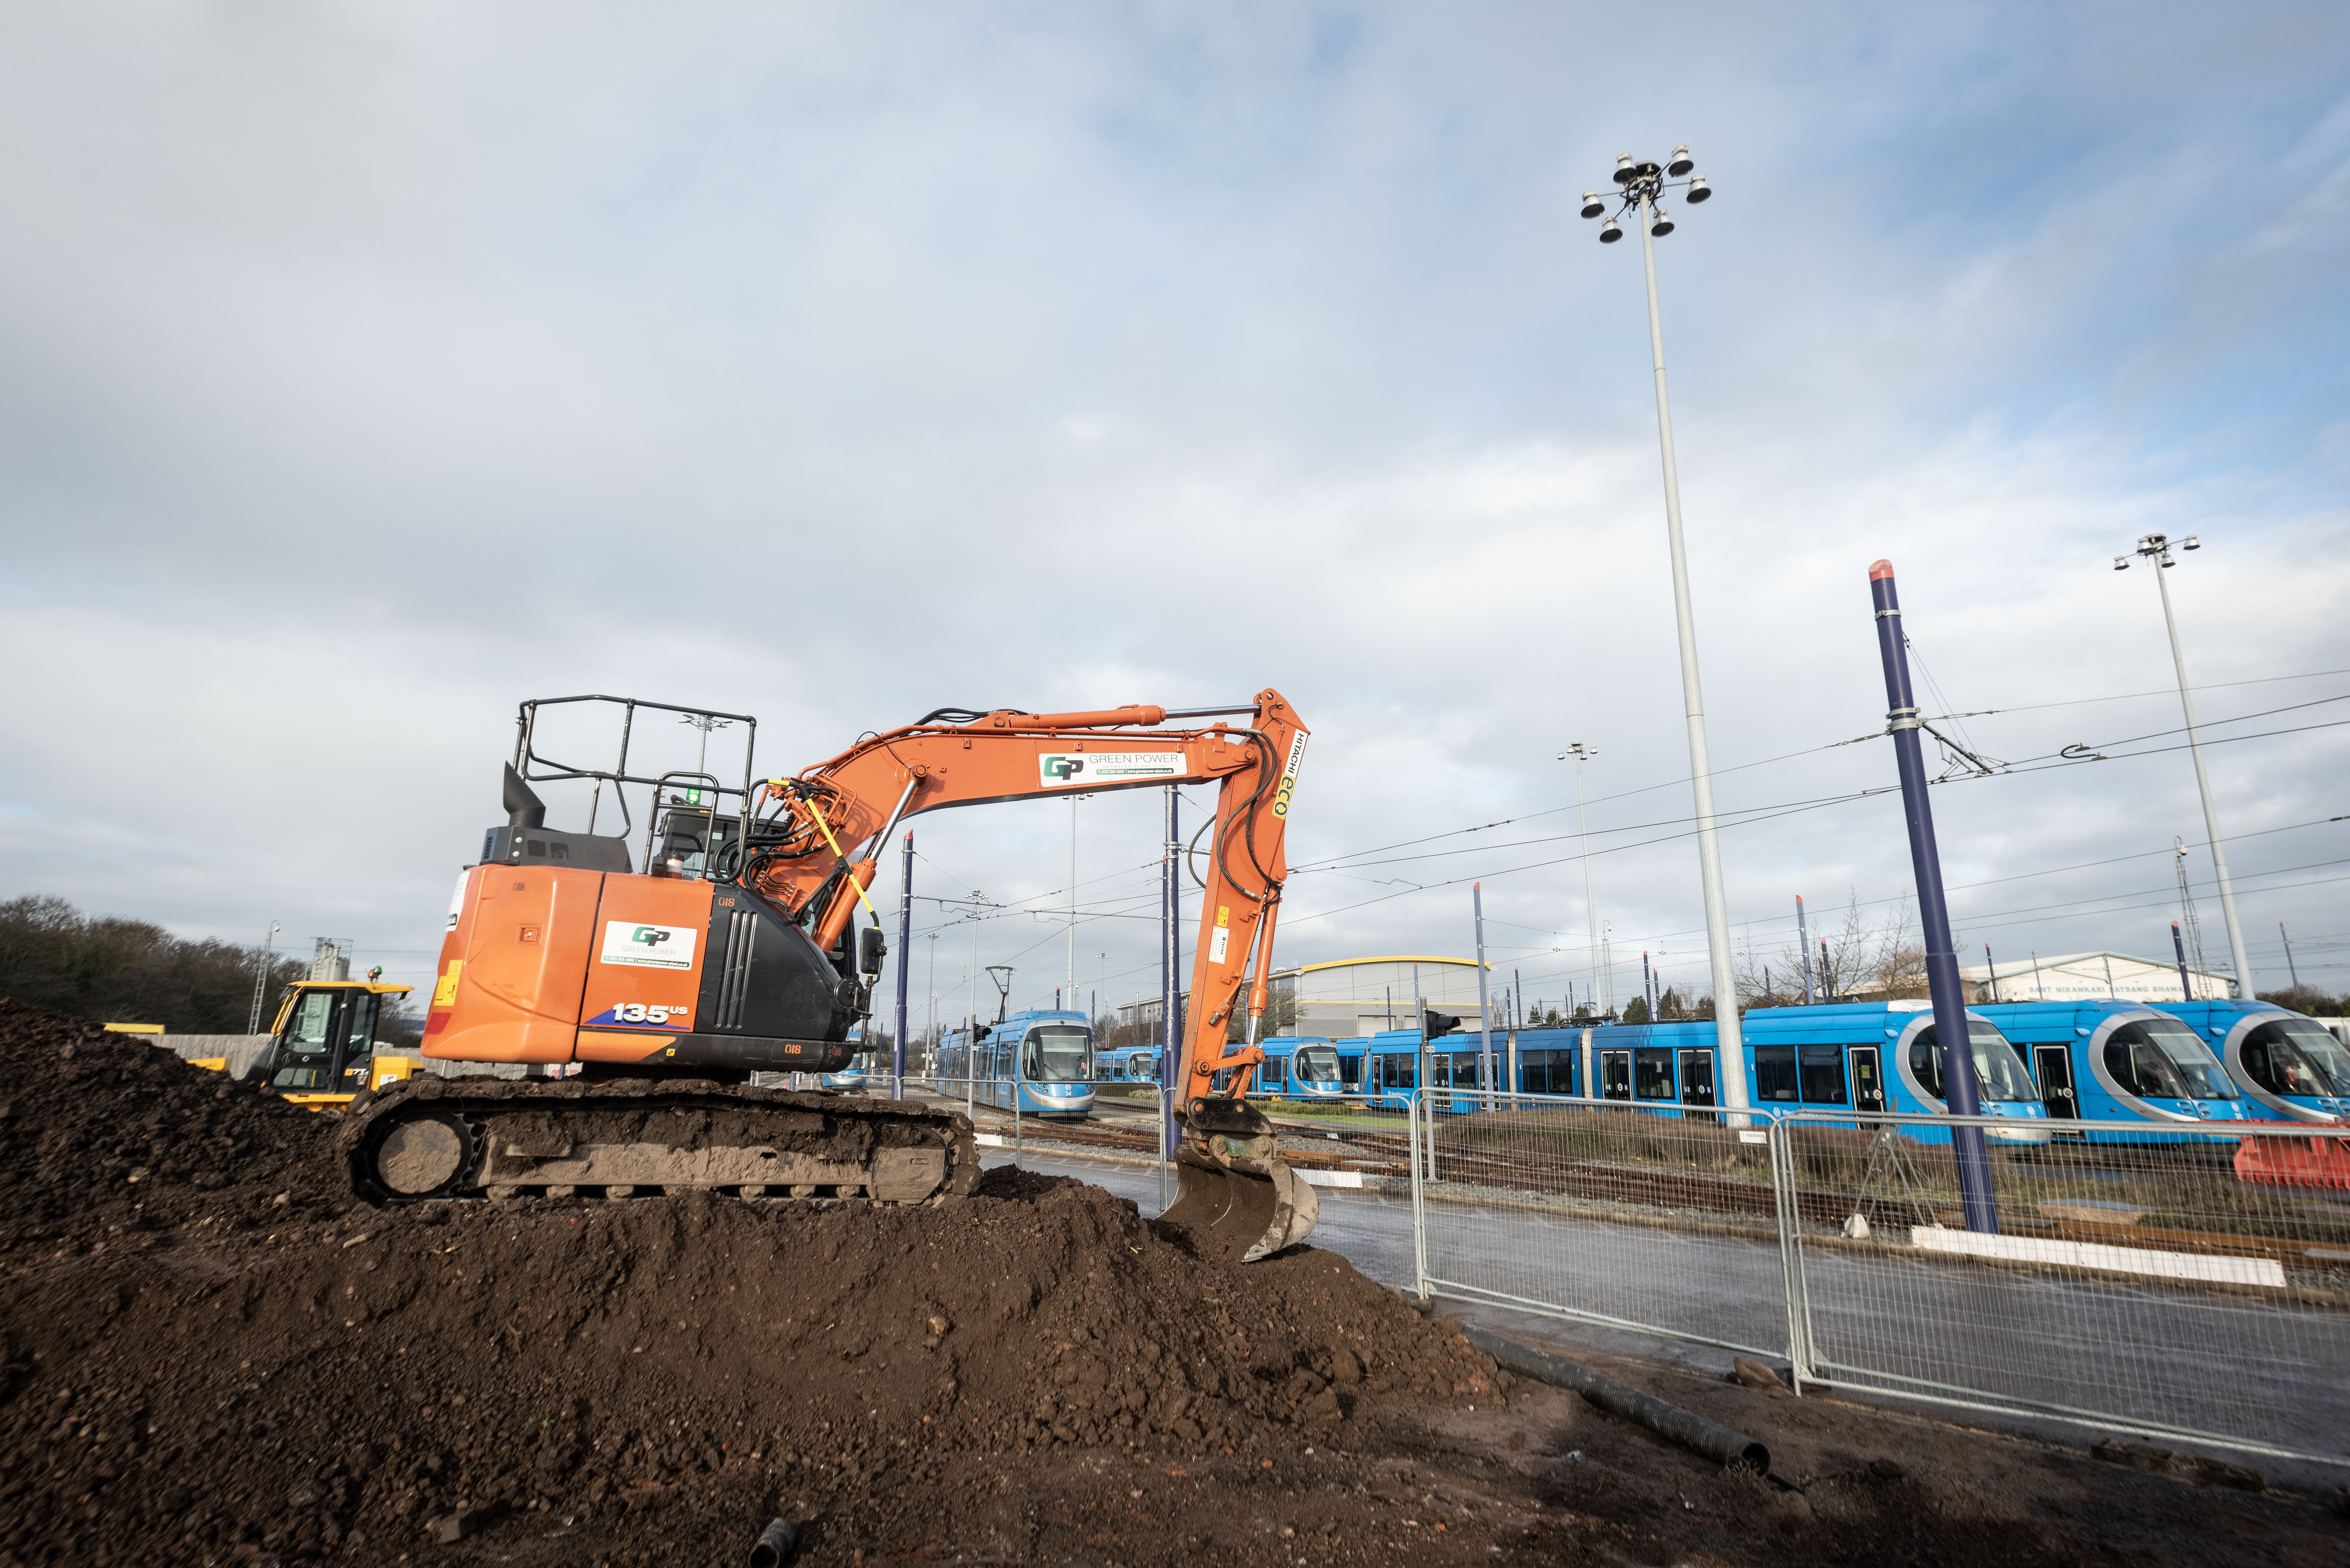 Digger working on land next to parked blue Metro trams at the depot